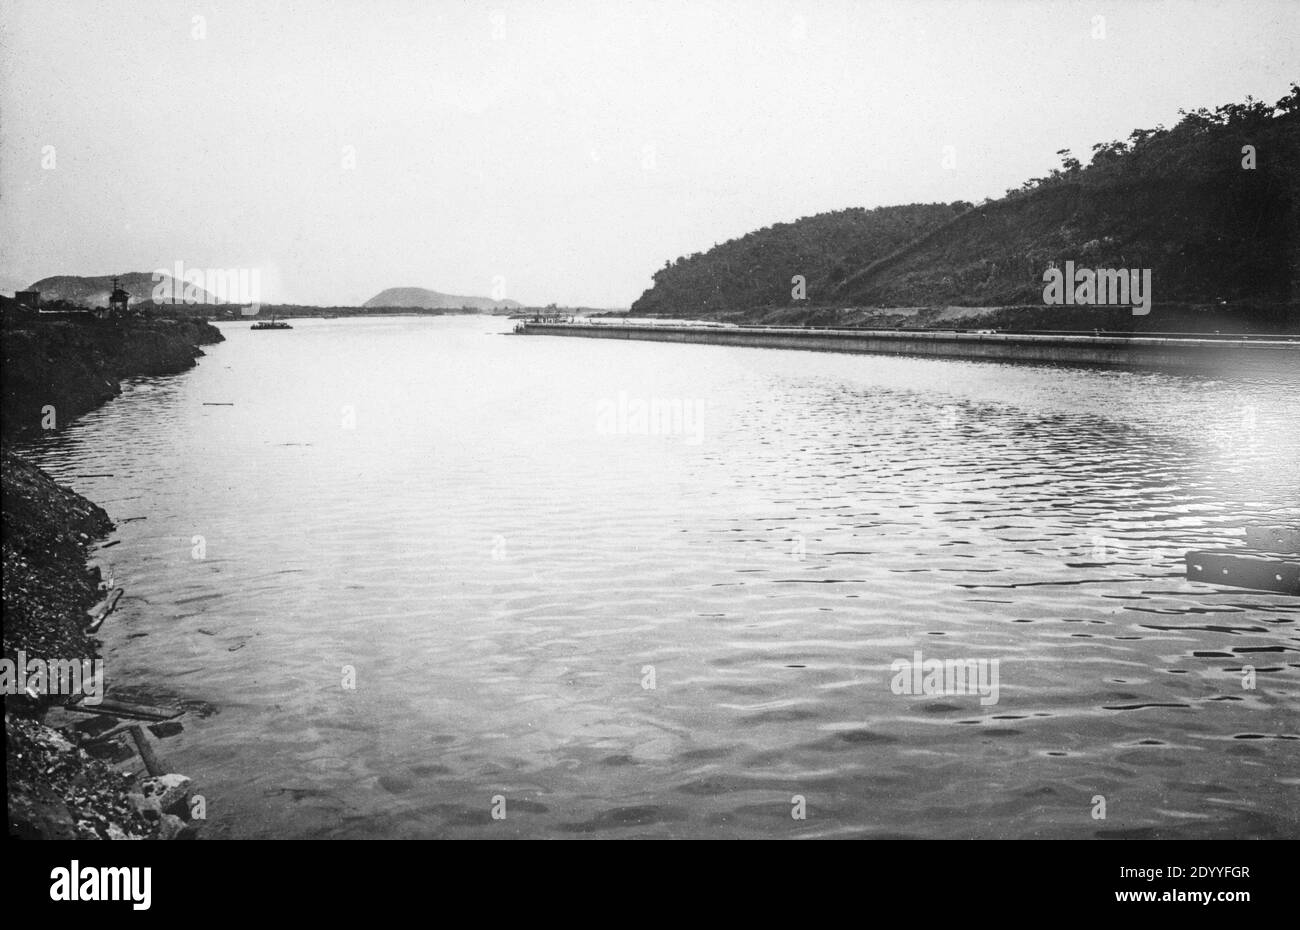 Early twentieth century black and white photograph showing the building of The Panama Canal. Image shows working one the Gamboa Dyke. Stock Photo